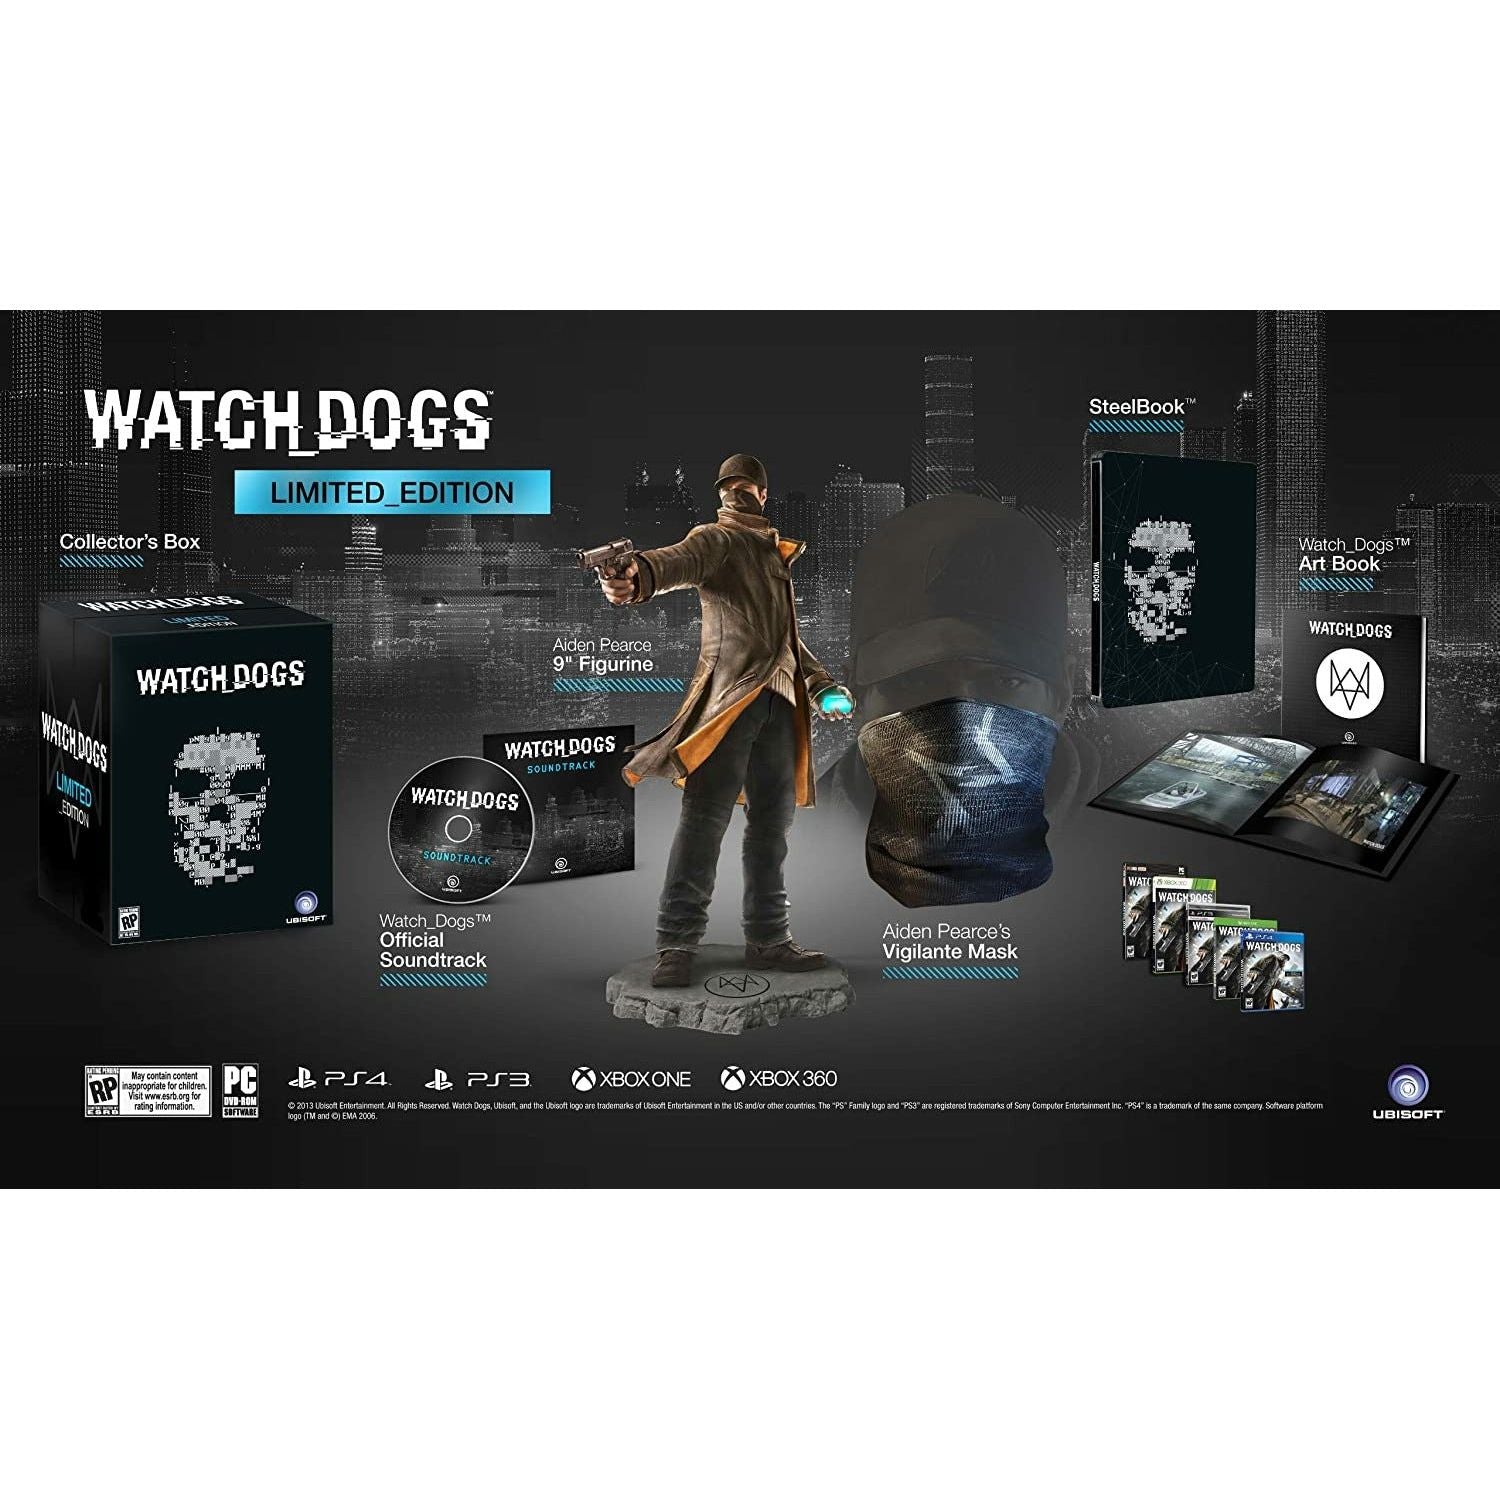 XBOX ONE - Watch Dogs Limited Edition (Sealed)